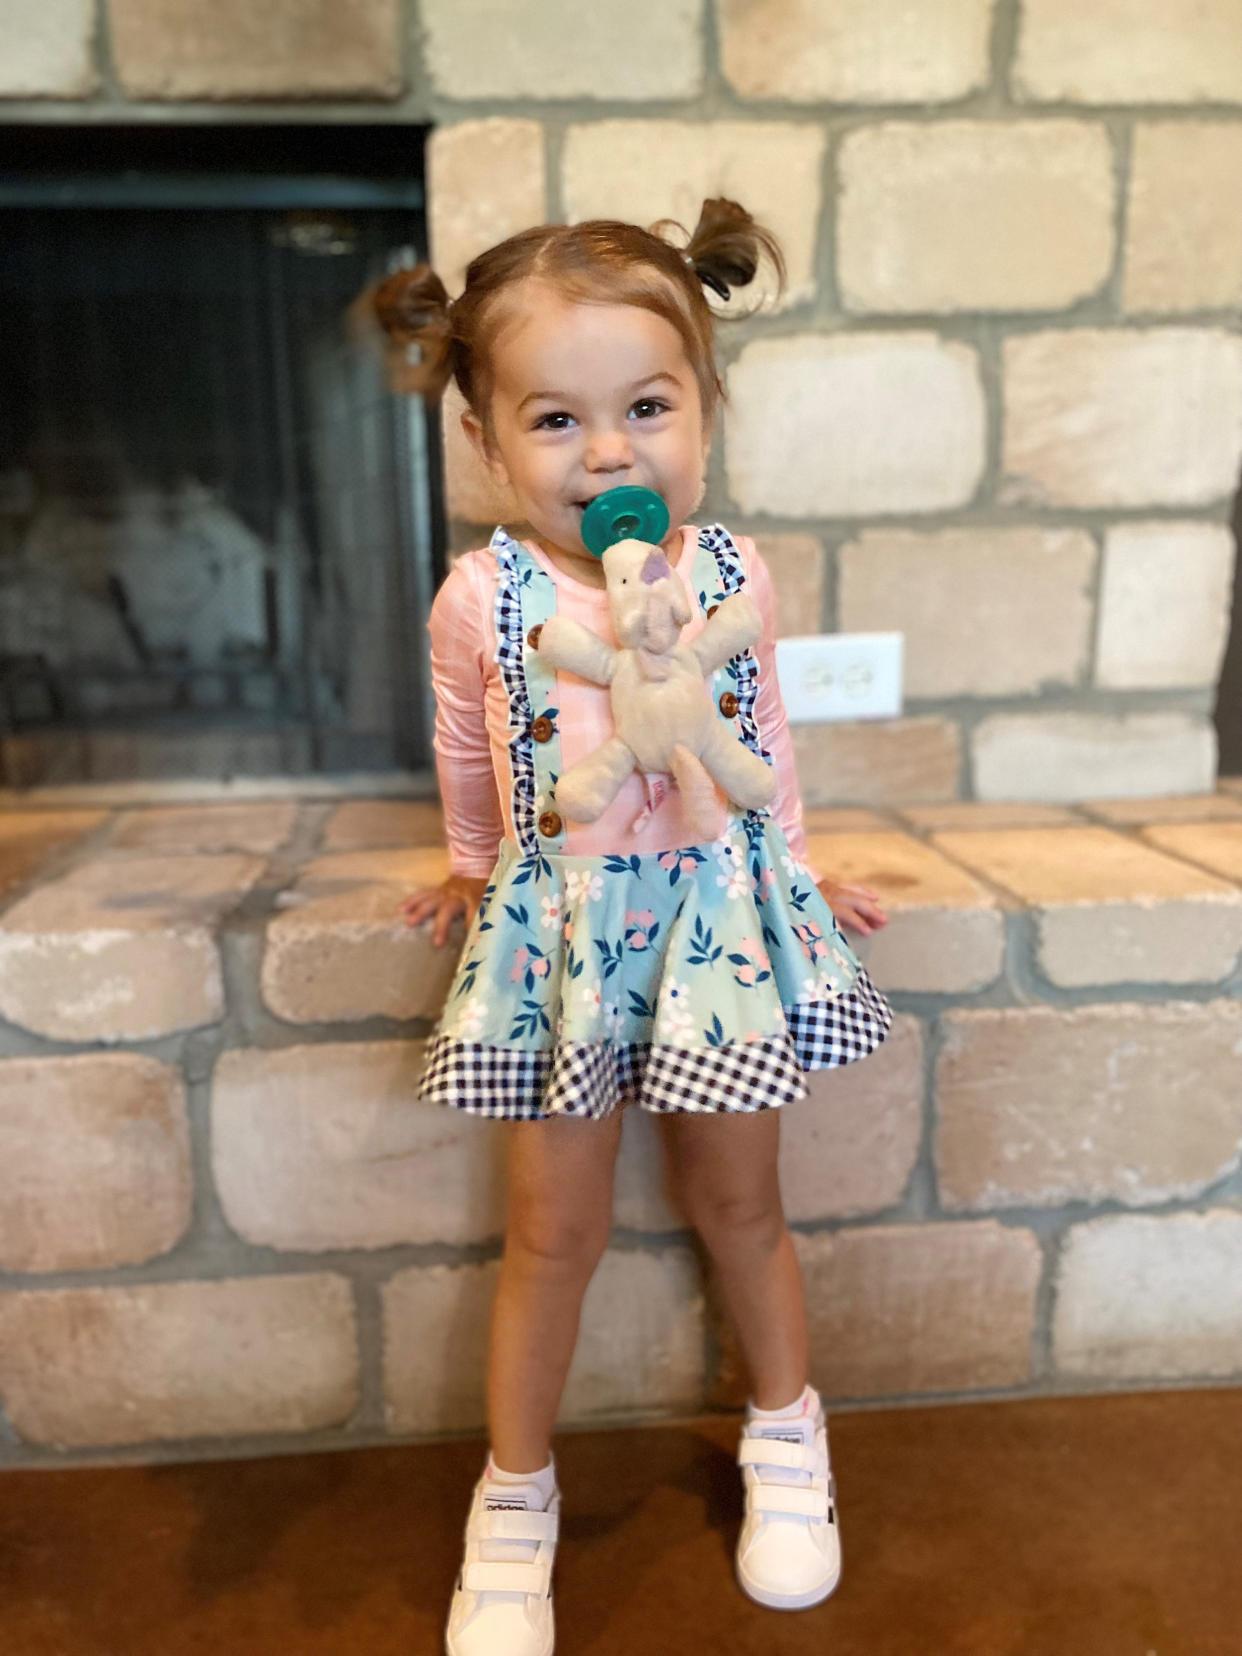 Ellie is deaf in her left ear and has hearing loss in her right. Thanks to early intervention, she's thriving even though she was born with CMV. (Courtesy Corey Clem)